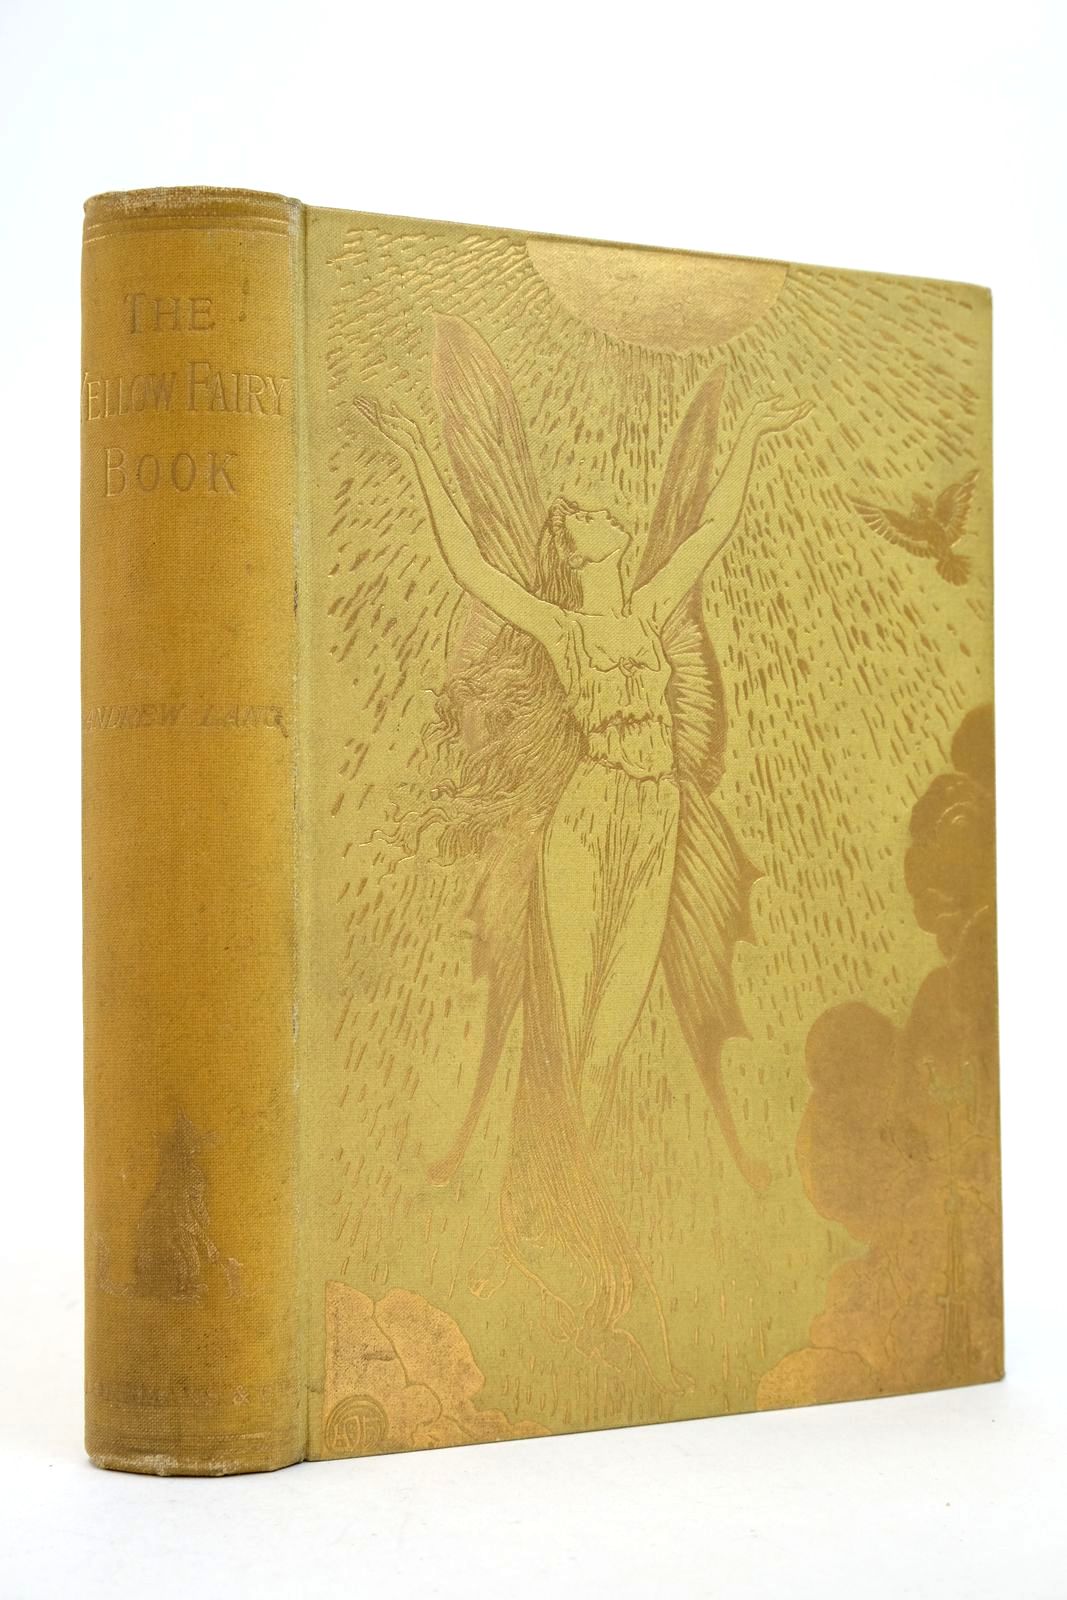 Photo of THE YELLOW FAIRY BOOK written by Lang, Andrew illustrated by Ford, H.J. published by Longmans, Green & Co. (STOCK CODE: 2139753)  for sale by Stella & Rose's Books